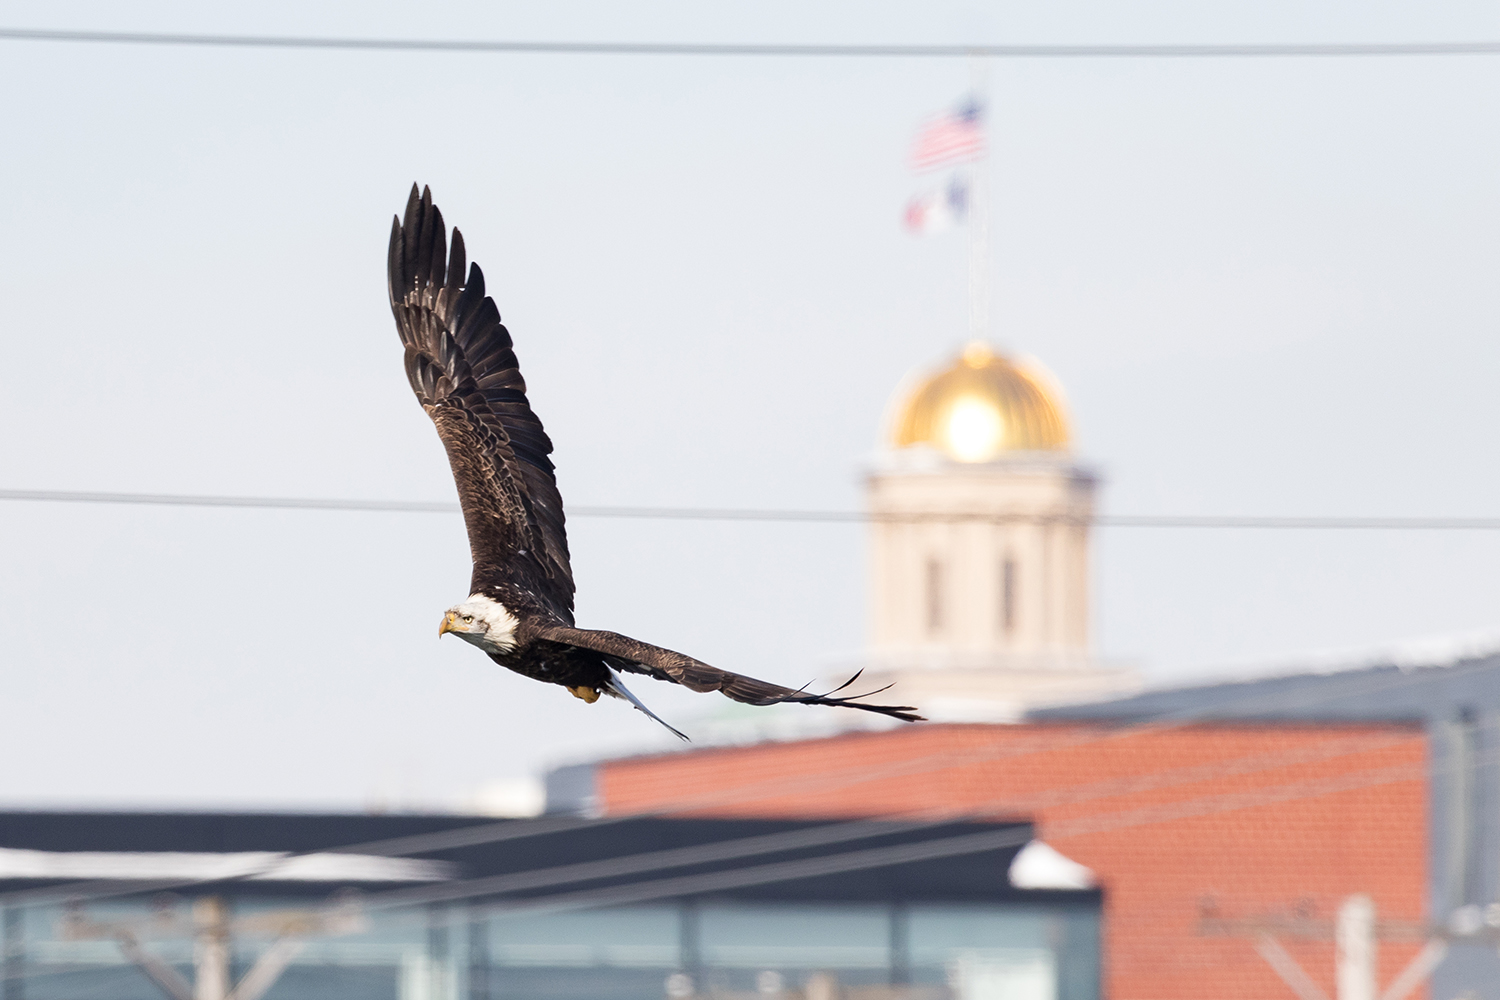  A bald eagle soars over downtown Iowa City with the Old Capitol dome in the background on Friday, Feb. 1, 2019. 